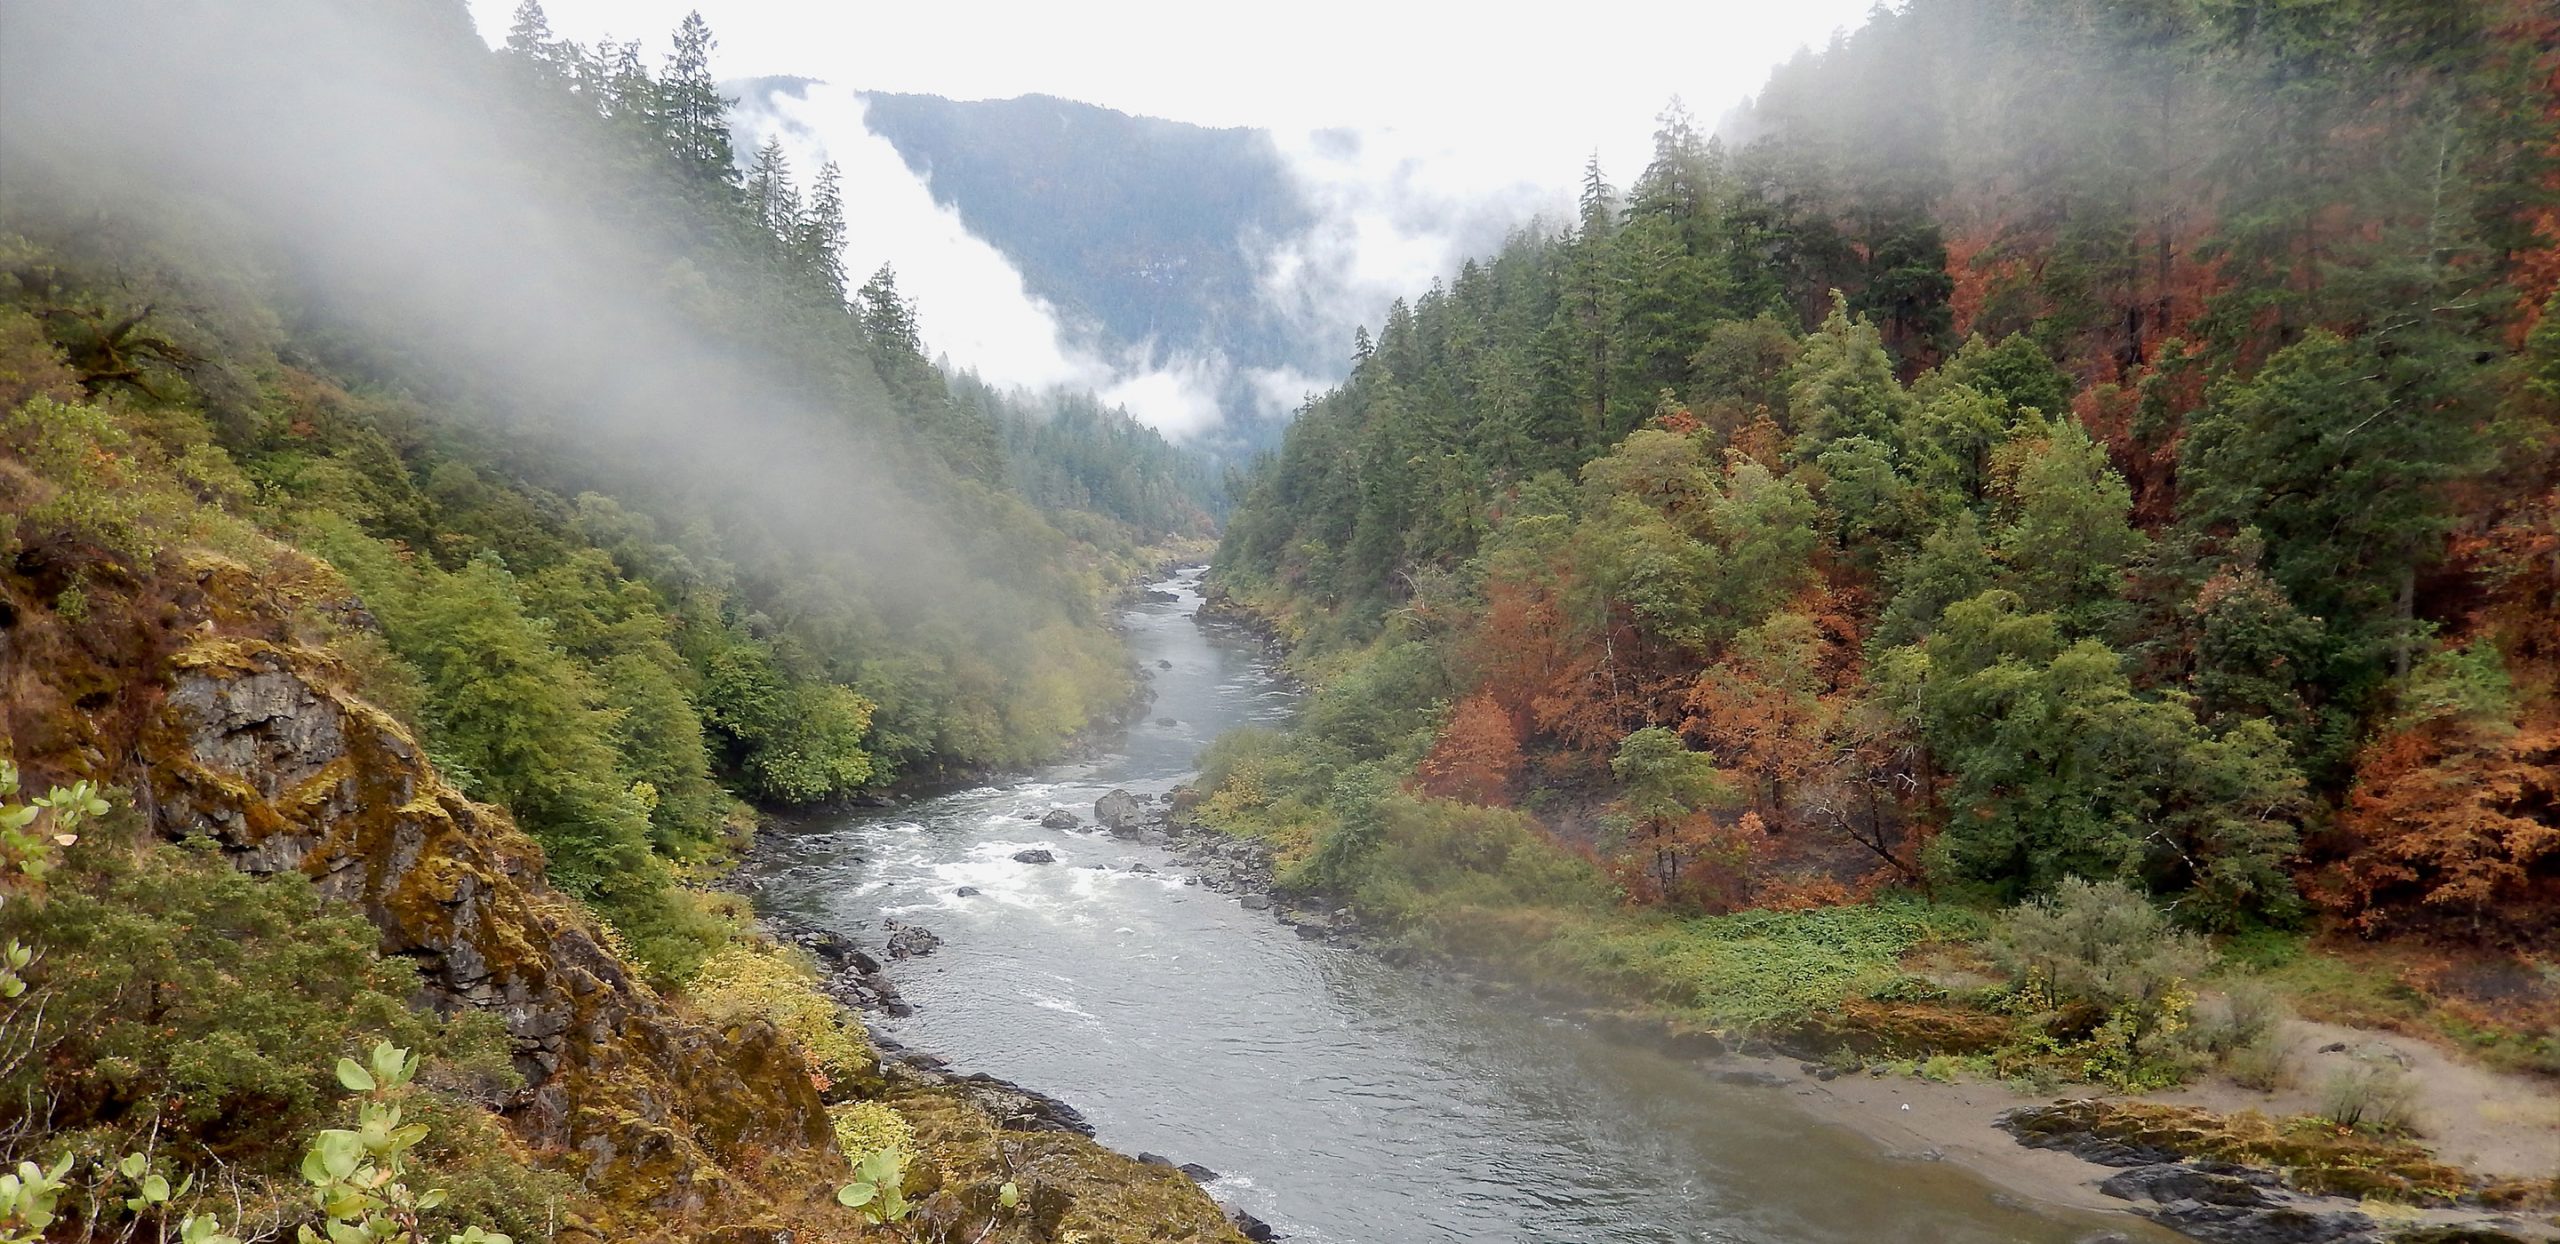 Historic Rogue River Trail offers challenging hike - Oregonforests